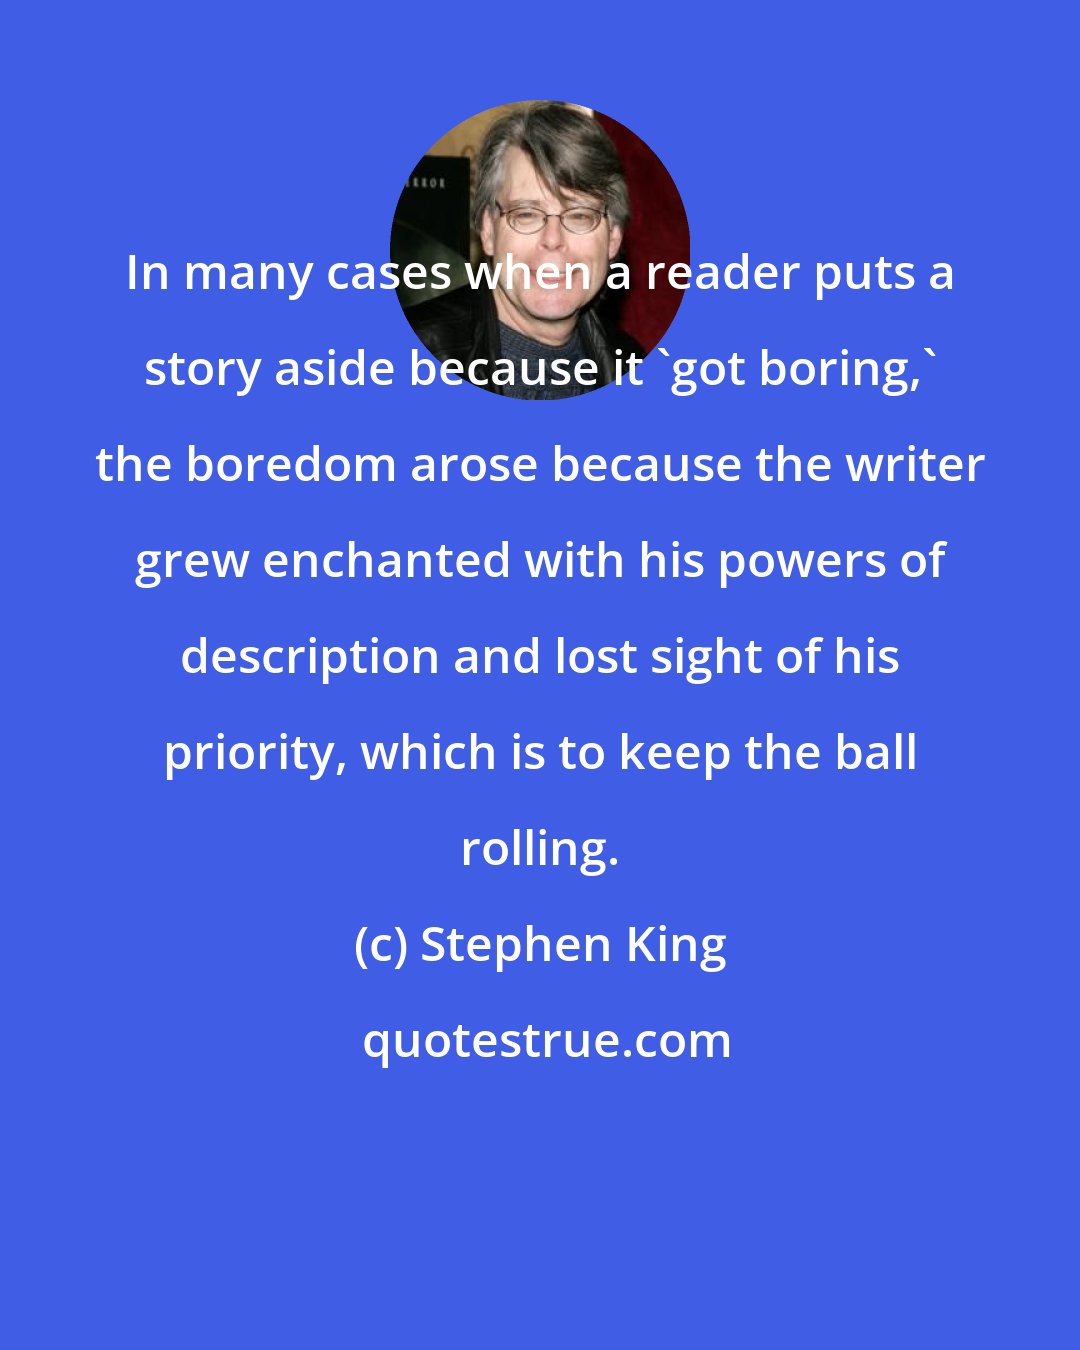 Stephen King: In many cases when a reader puts a story aside because it 'got boring,' the boredom arose because the writer grew enchanted with his powers of description and lost sight of his priority, which is to keep the ball rolling.